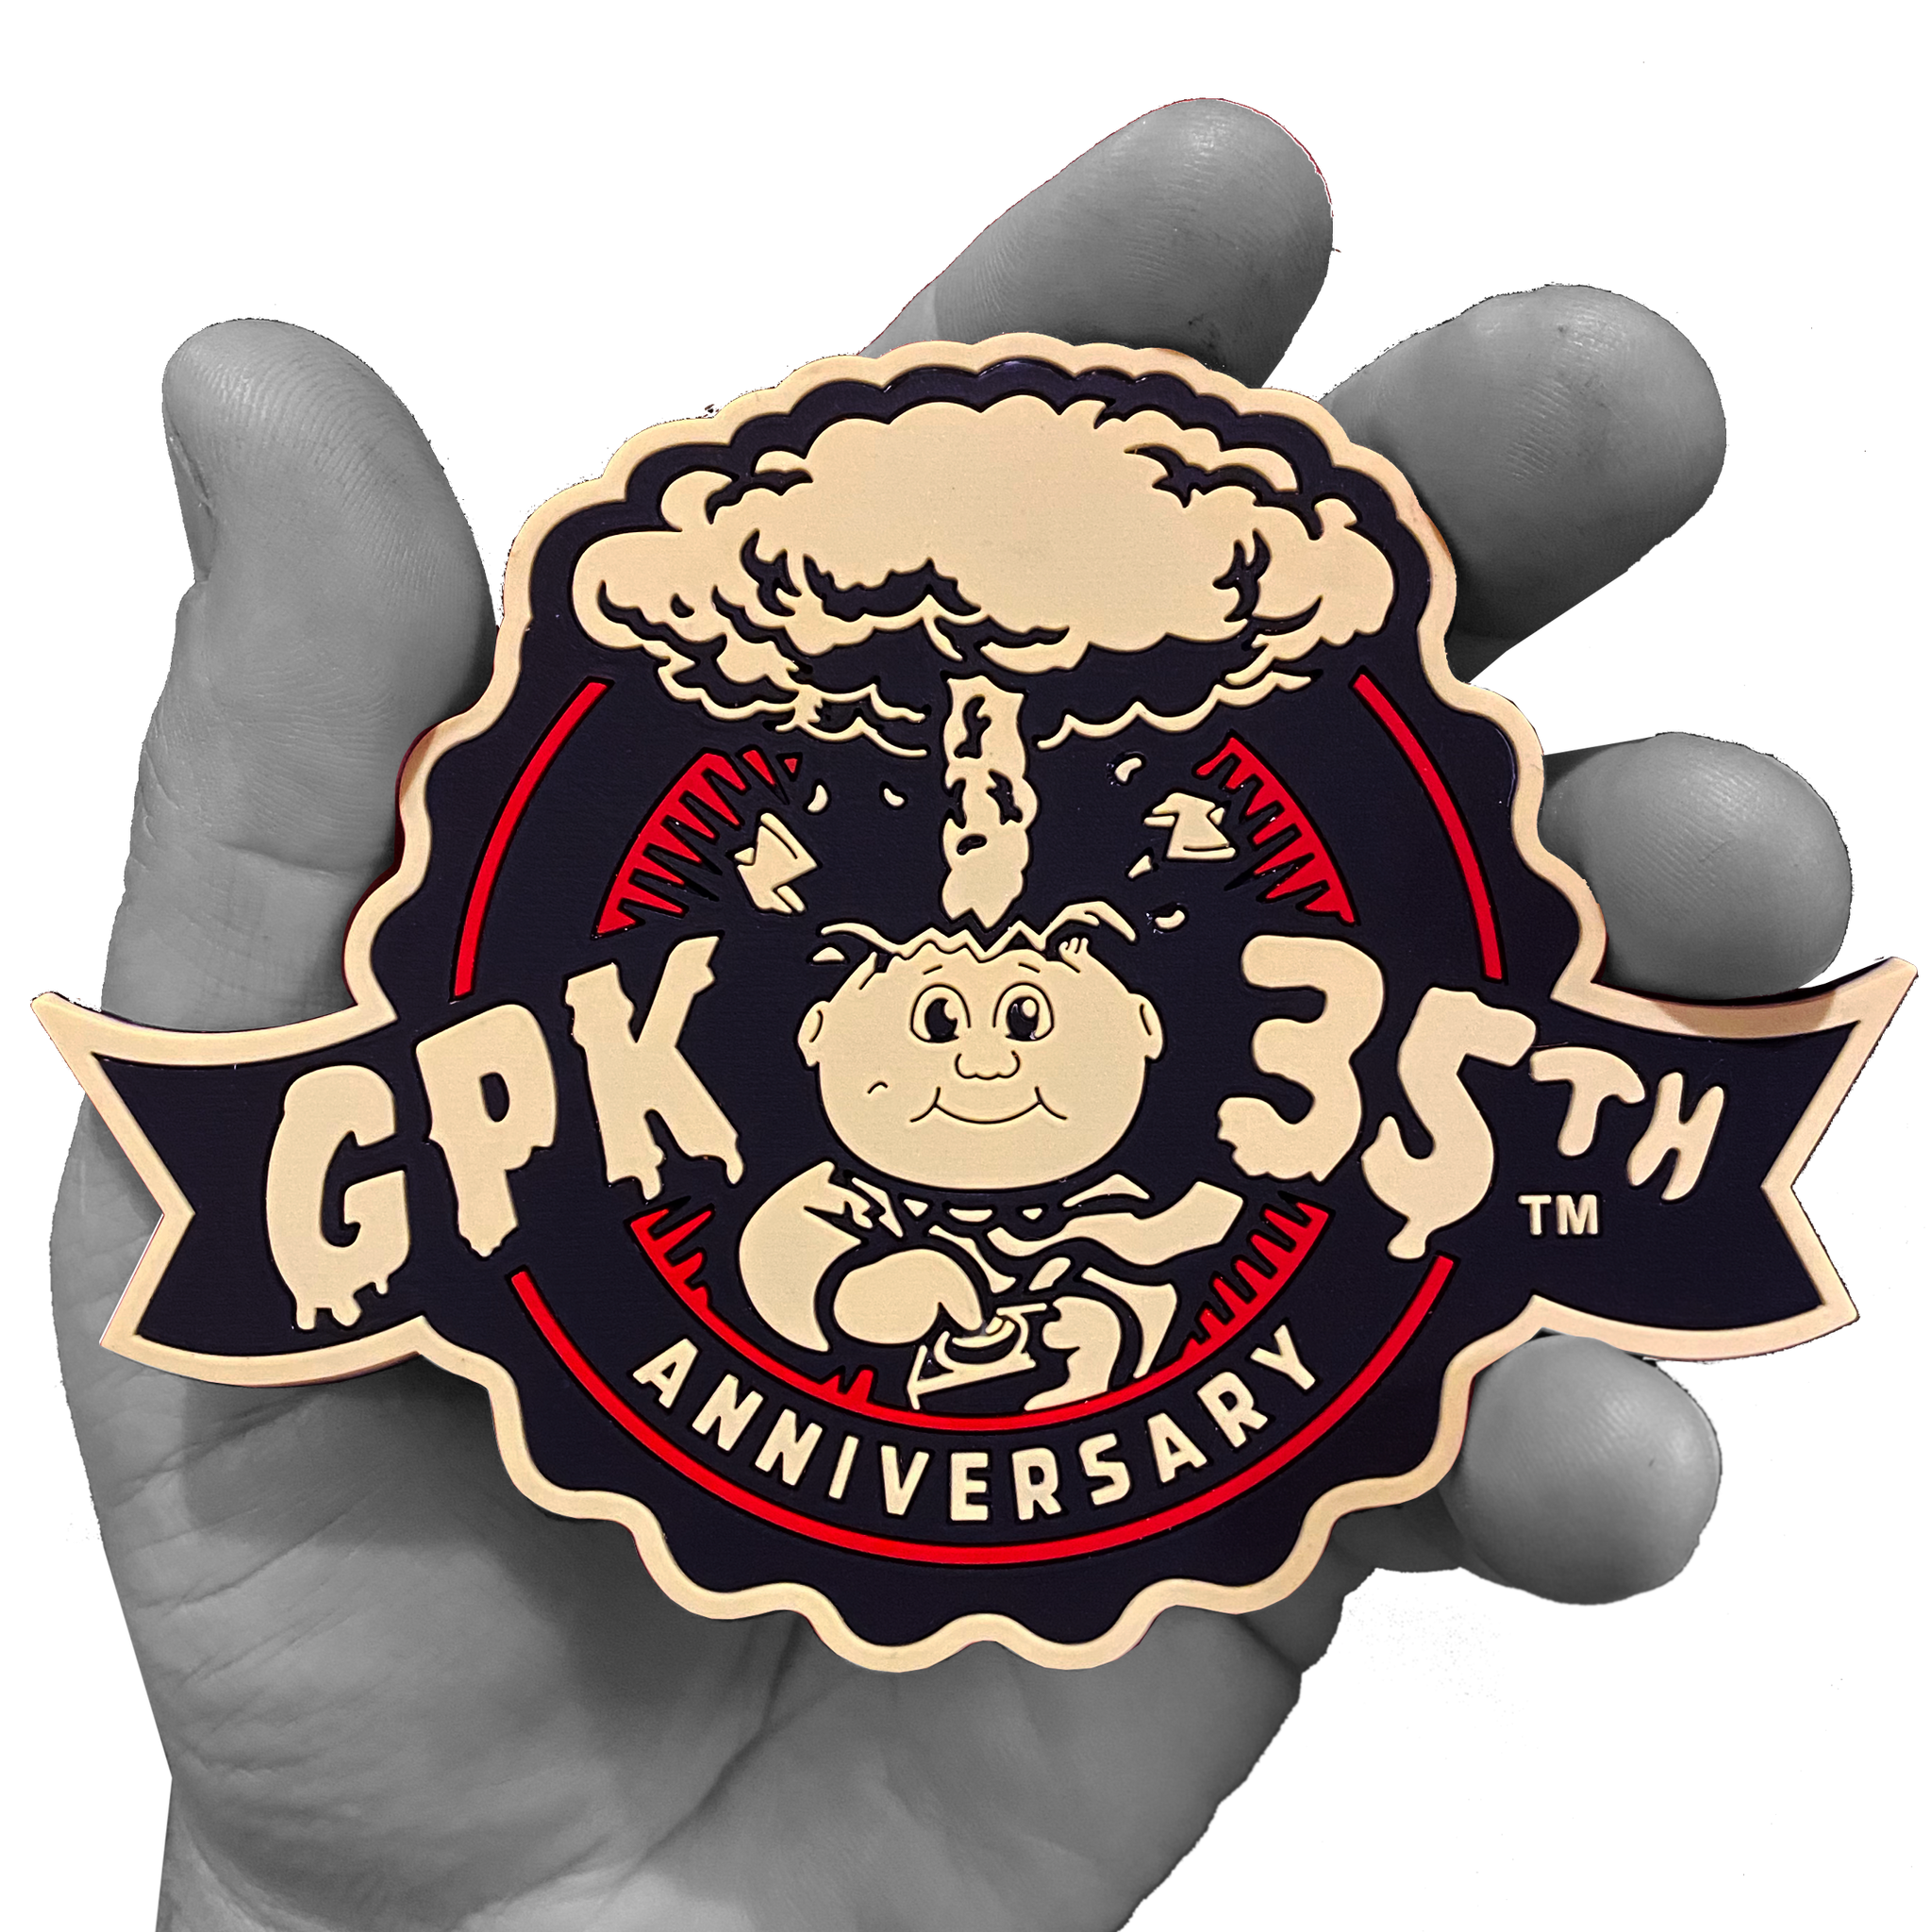 Exclusive Topps Officially Licensed "Glowster" GPK Garbage Pail Kids Coaster Adam Bomb 35th Anniversary GPK-AA-001